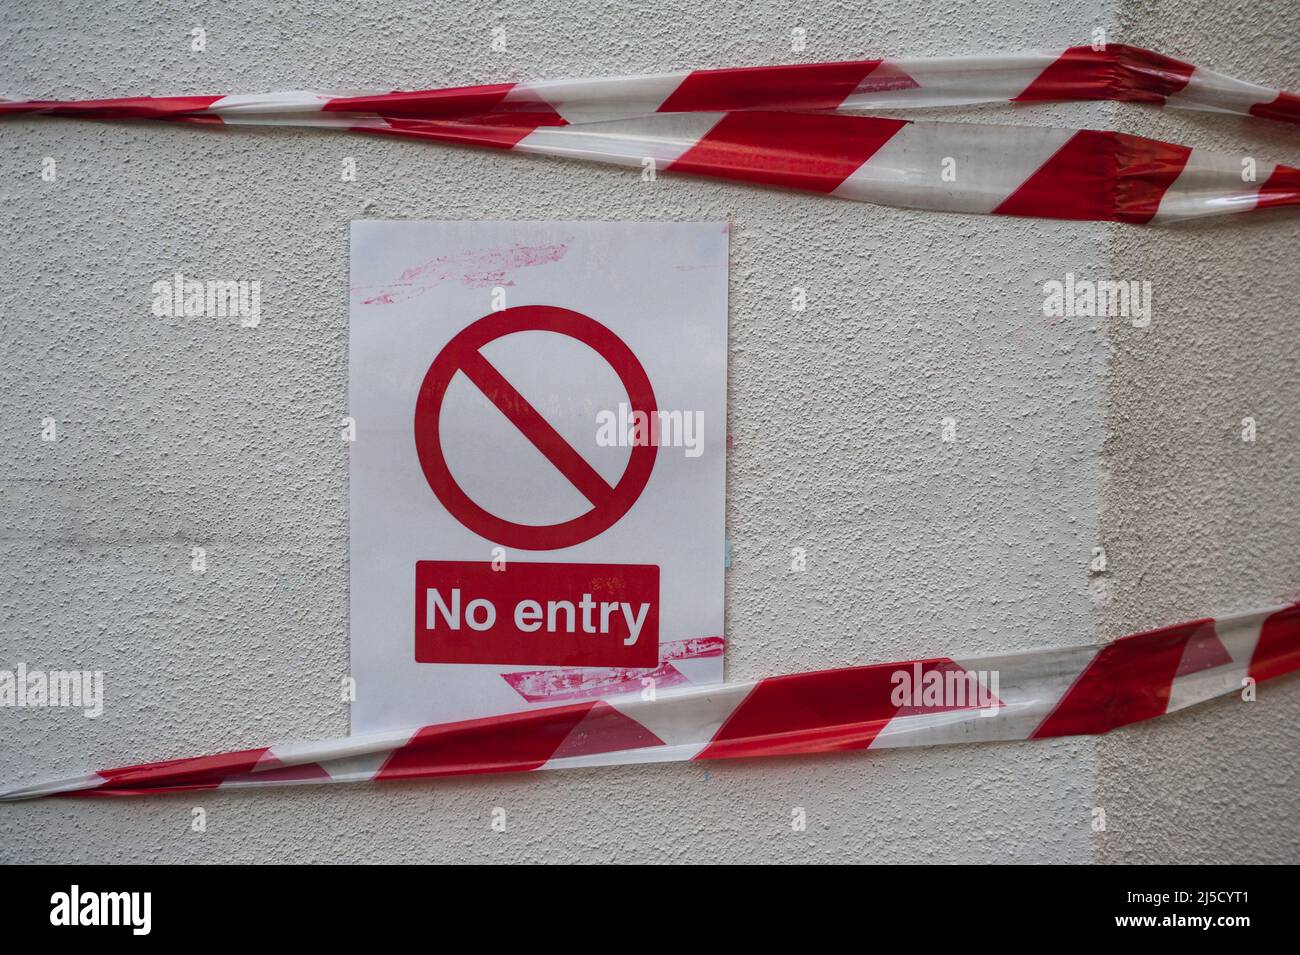 05/28/2020, Singapore, Republic of Singapore, Asia - The blocked entrance to a building with a No Entry sign and red and white barrier tape during the lockdown and partial curtailment of exits amid the Corona pandemic (Covid-19), which has been accompanied by massive restrictions on public life. [automated translation] Stock Photo